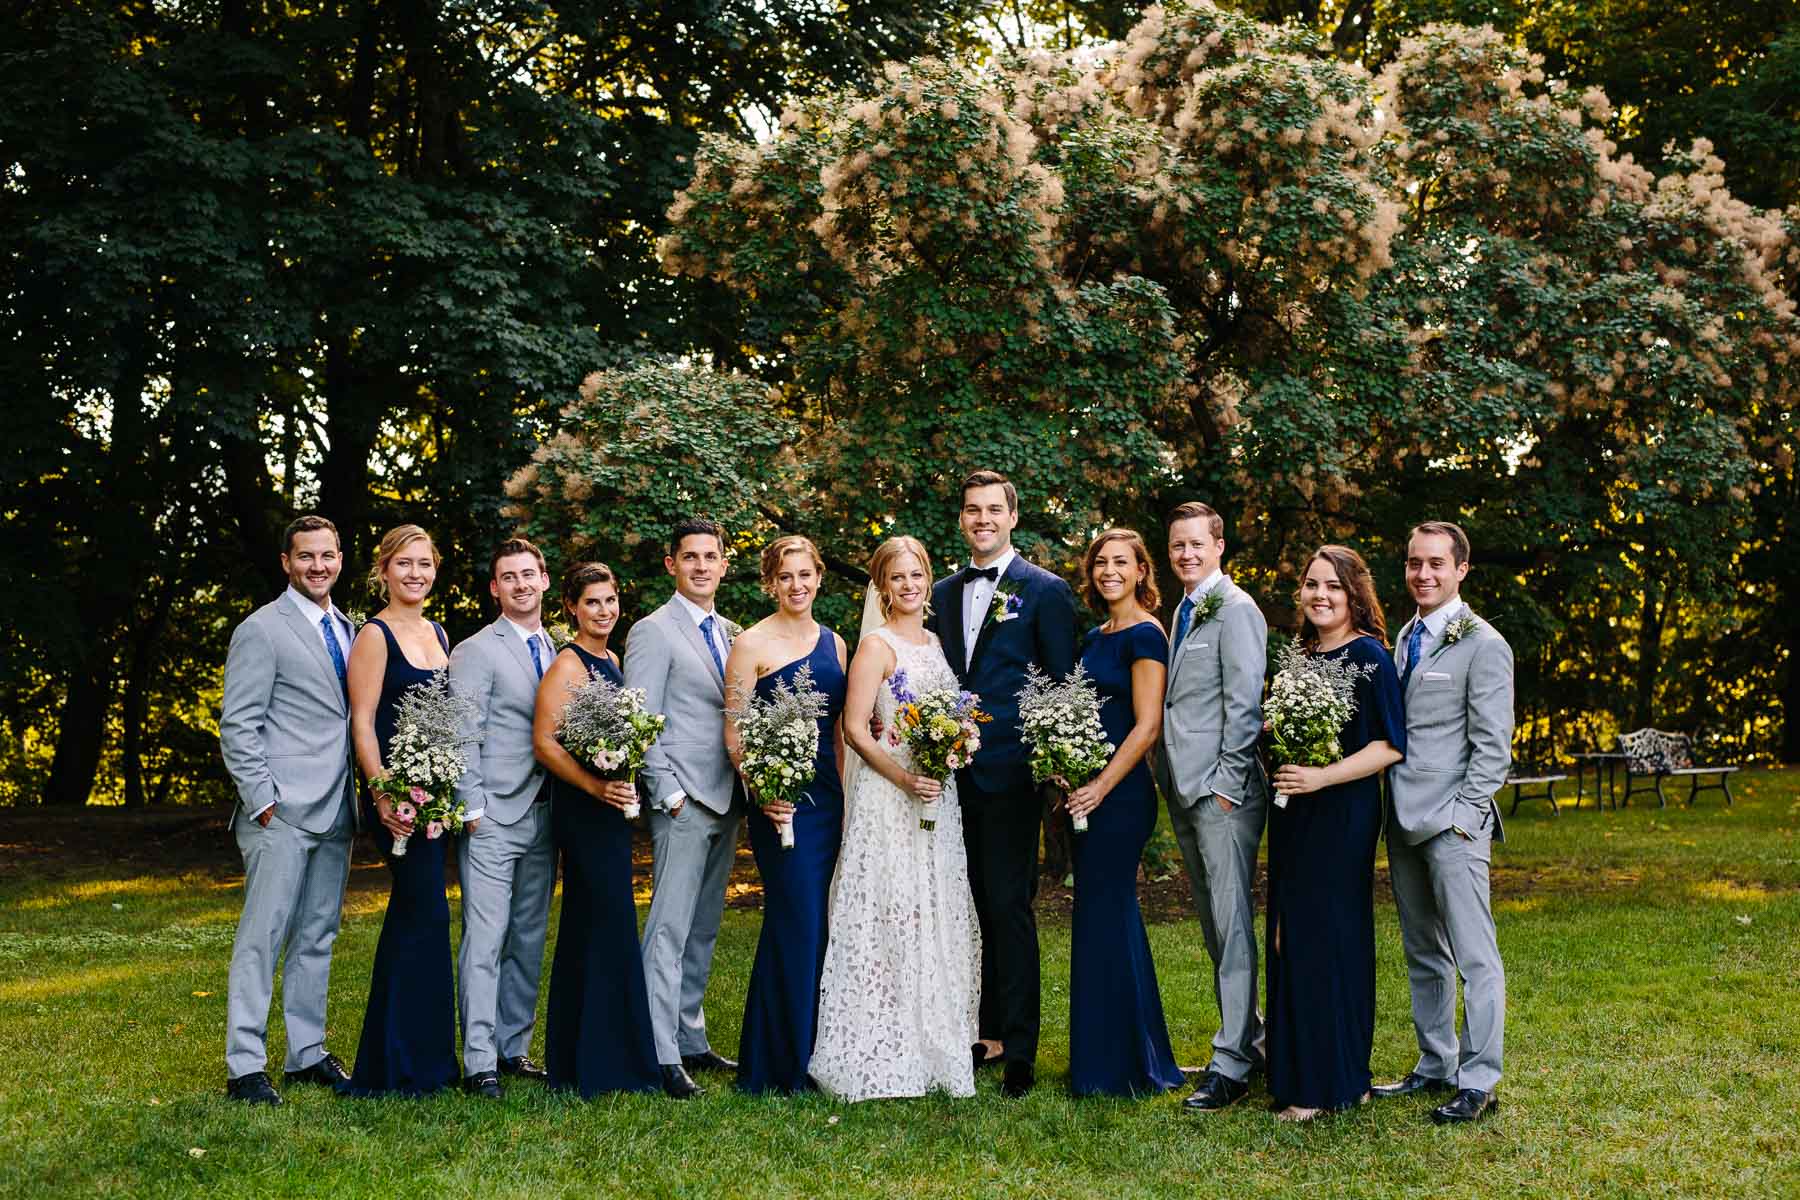 formal wedding portraits at Commander's Mansion in Watertown, MA. | Kelly Benvenuto Photography